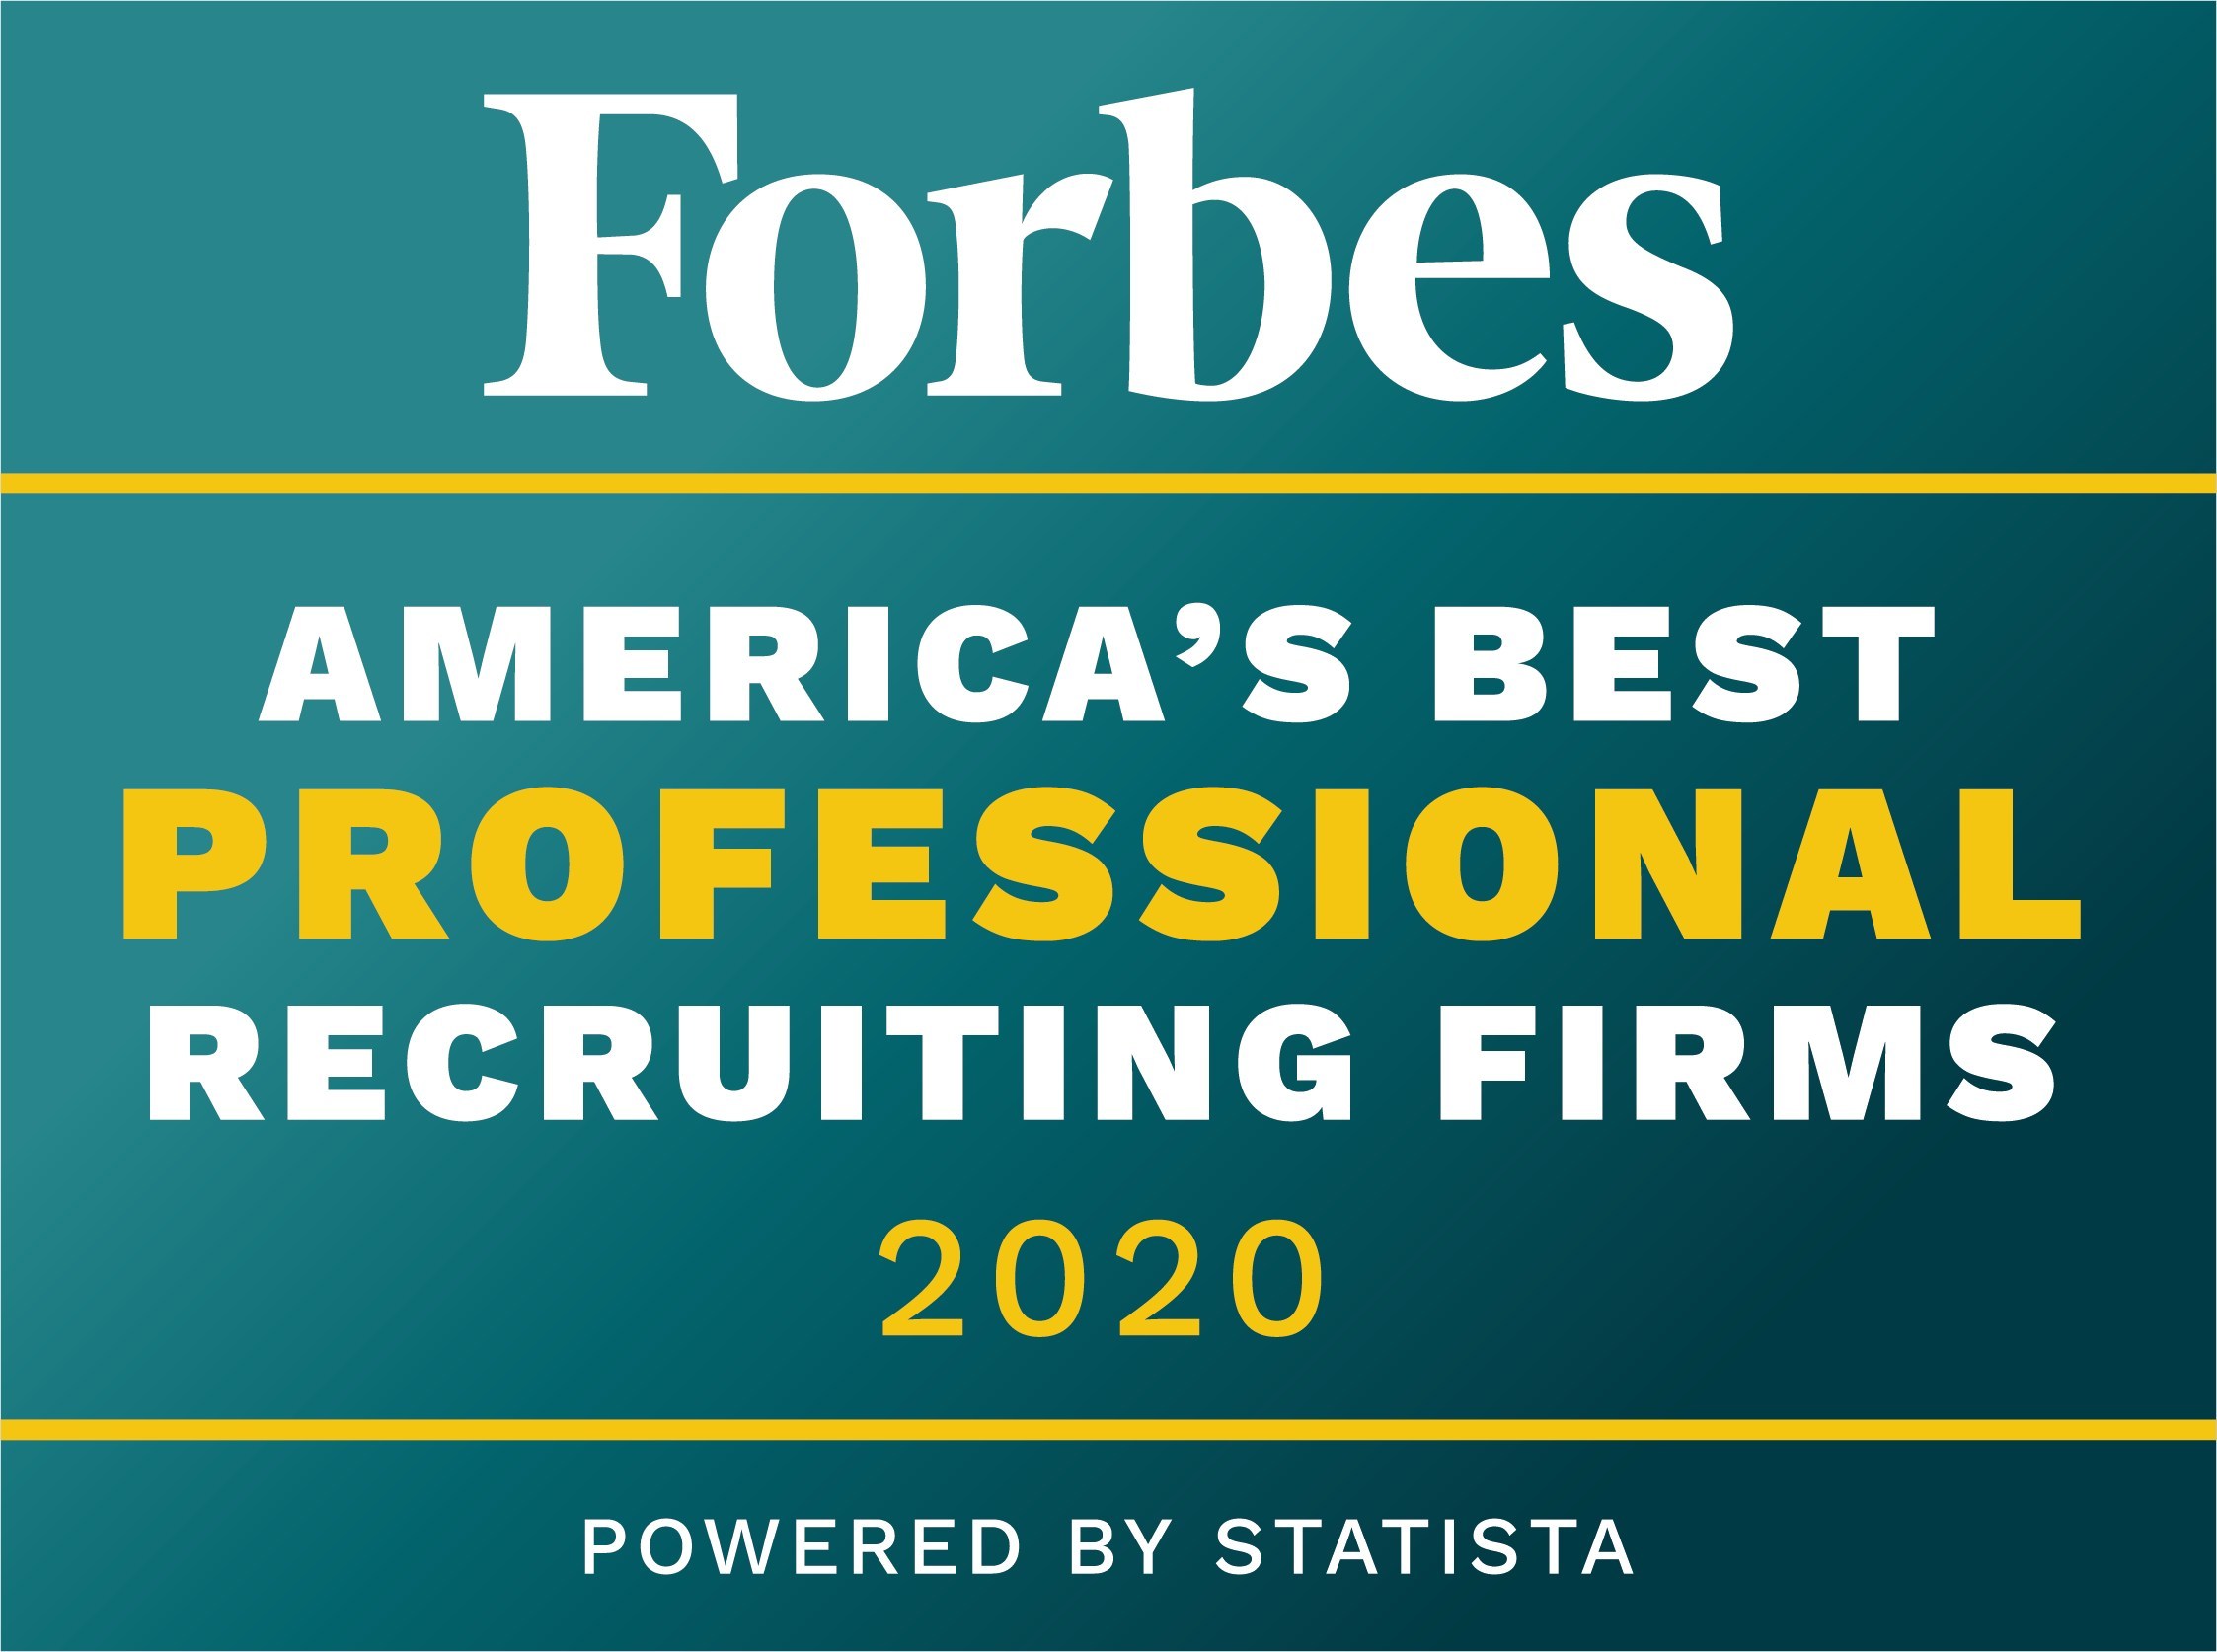 Forbes Names Goodwin Recruiting One of America's Best Recruiting Firms 2020